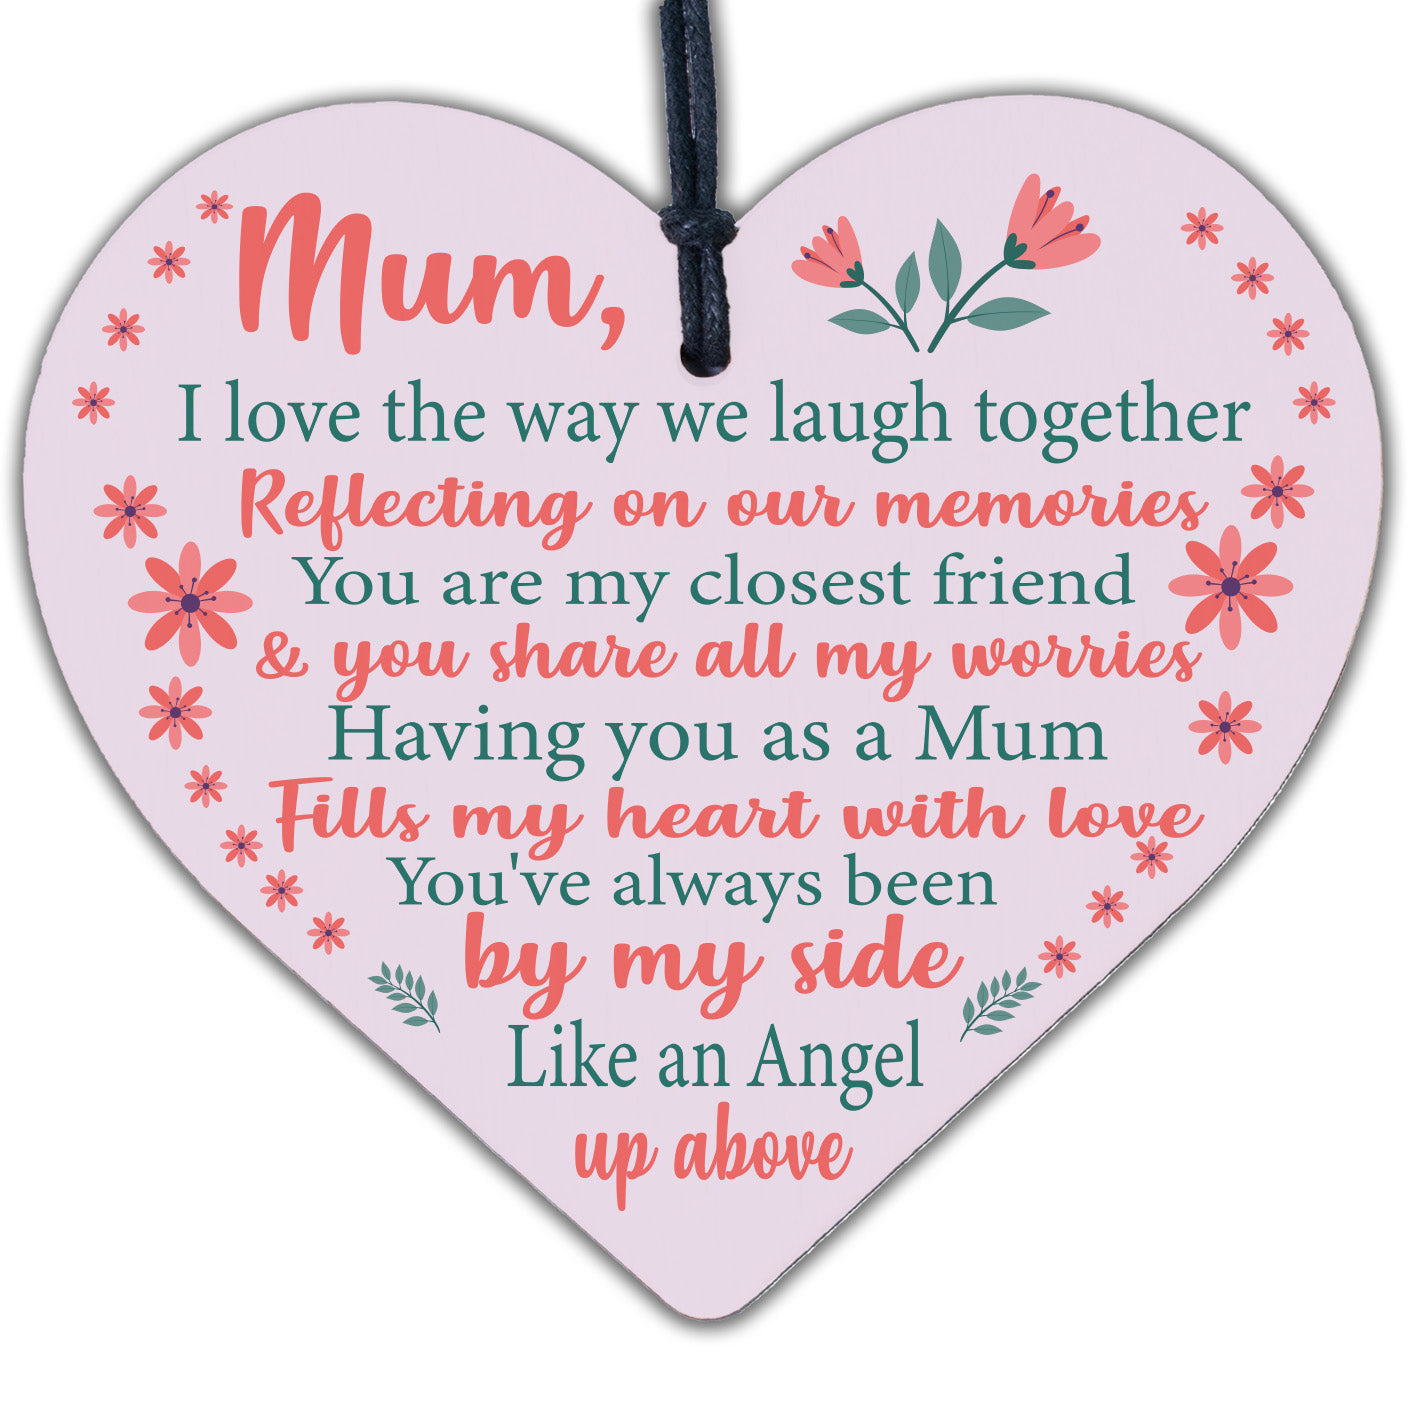 Mum Gifts From Daughter Heart Mum Gifts From Son Birthday Thank You Keepsake